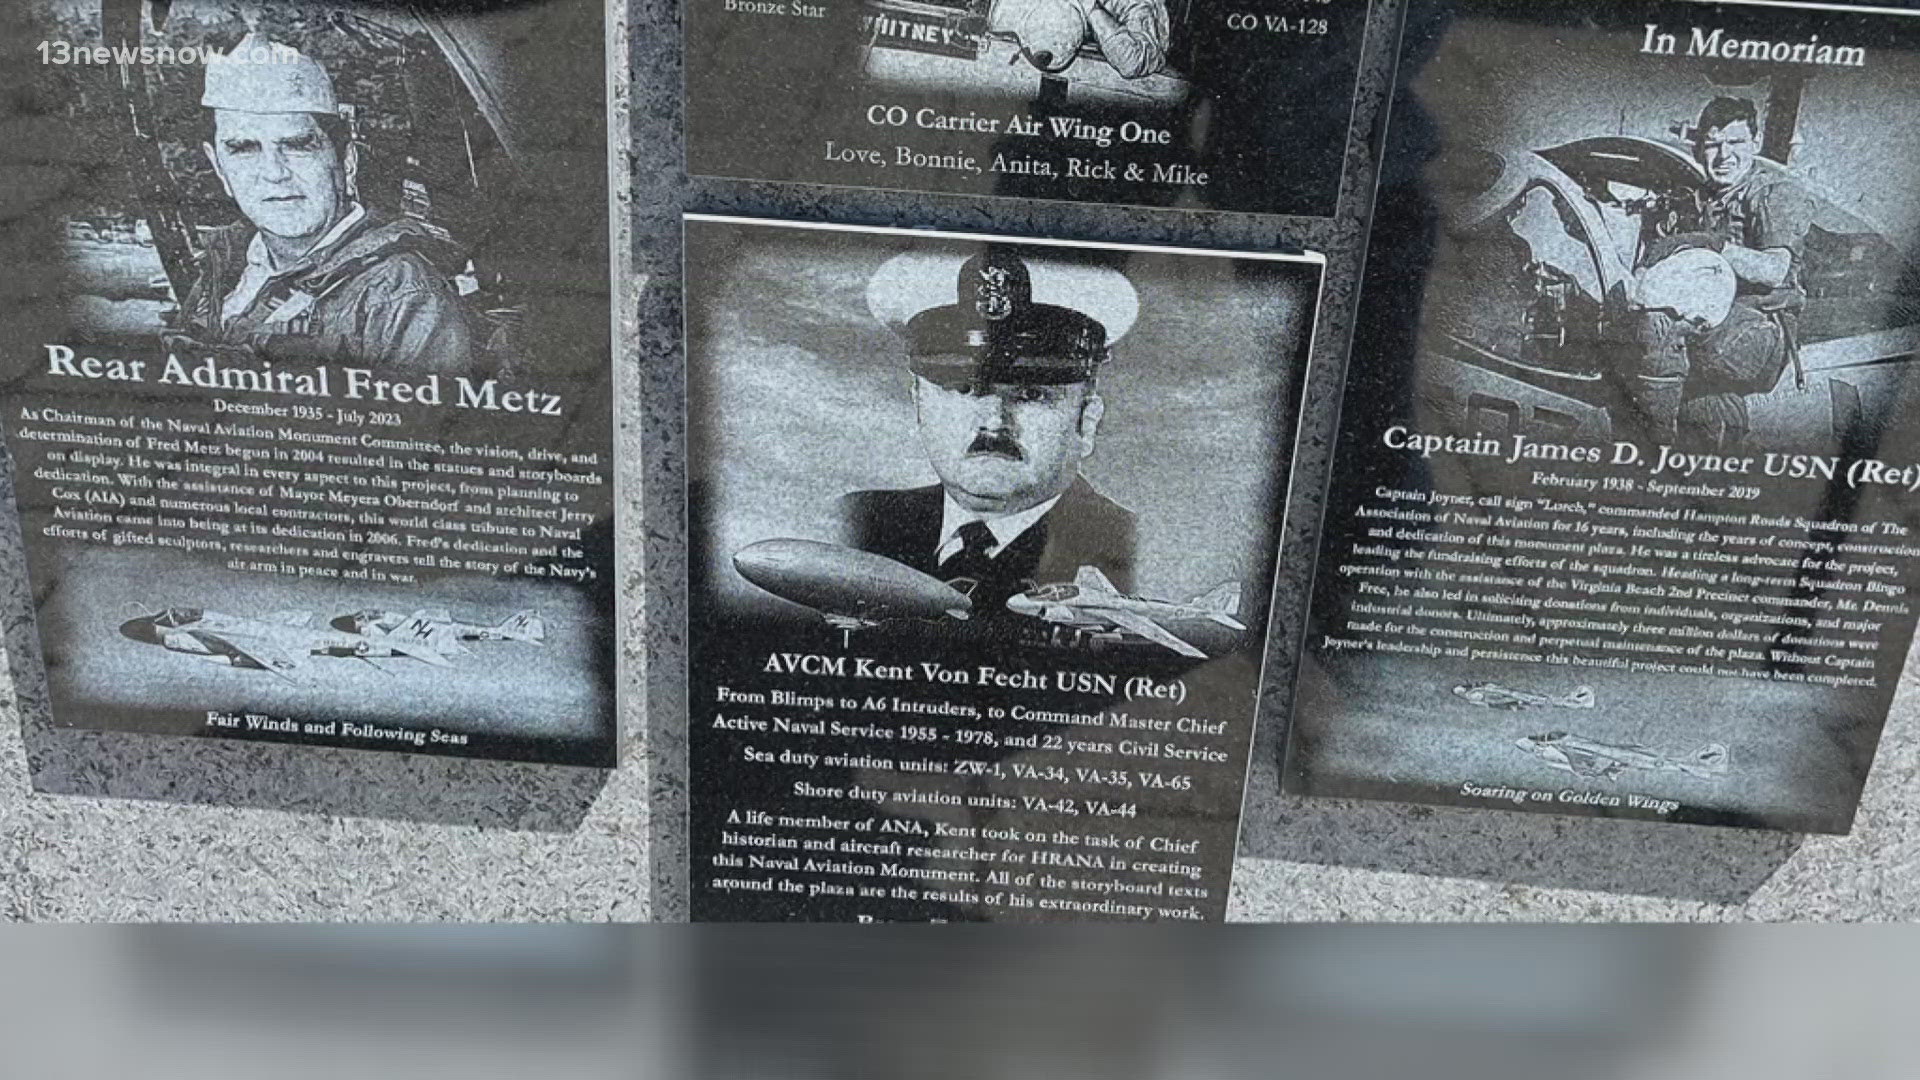 They assumed their places at the Association of Naval Aviation Monument in Virginia Beach.